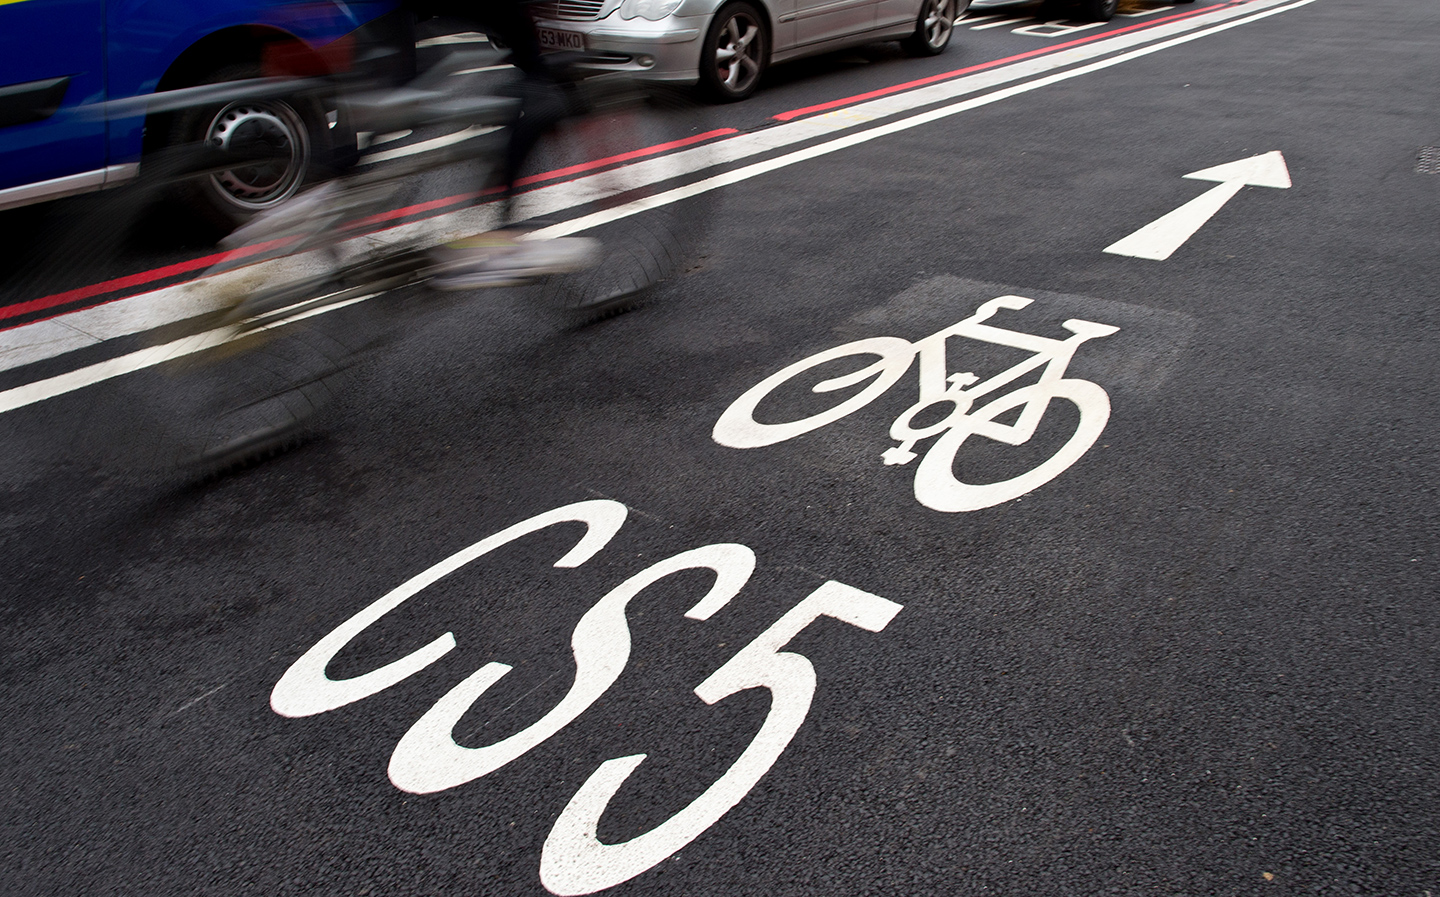 Cycling equivalent to death by dangerous driving laws could be enacted